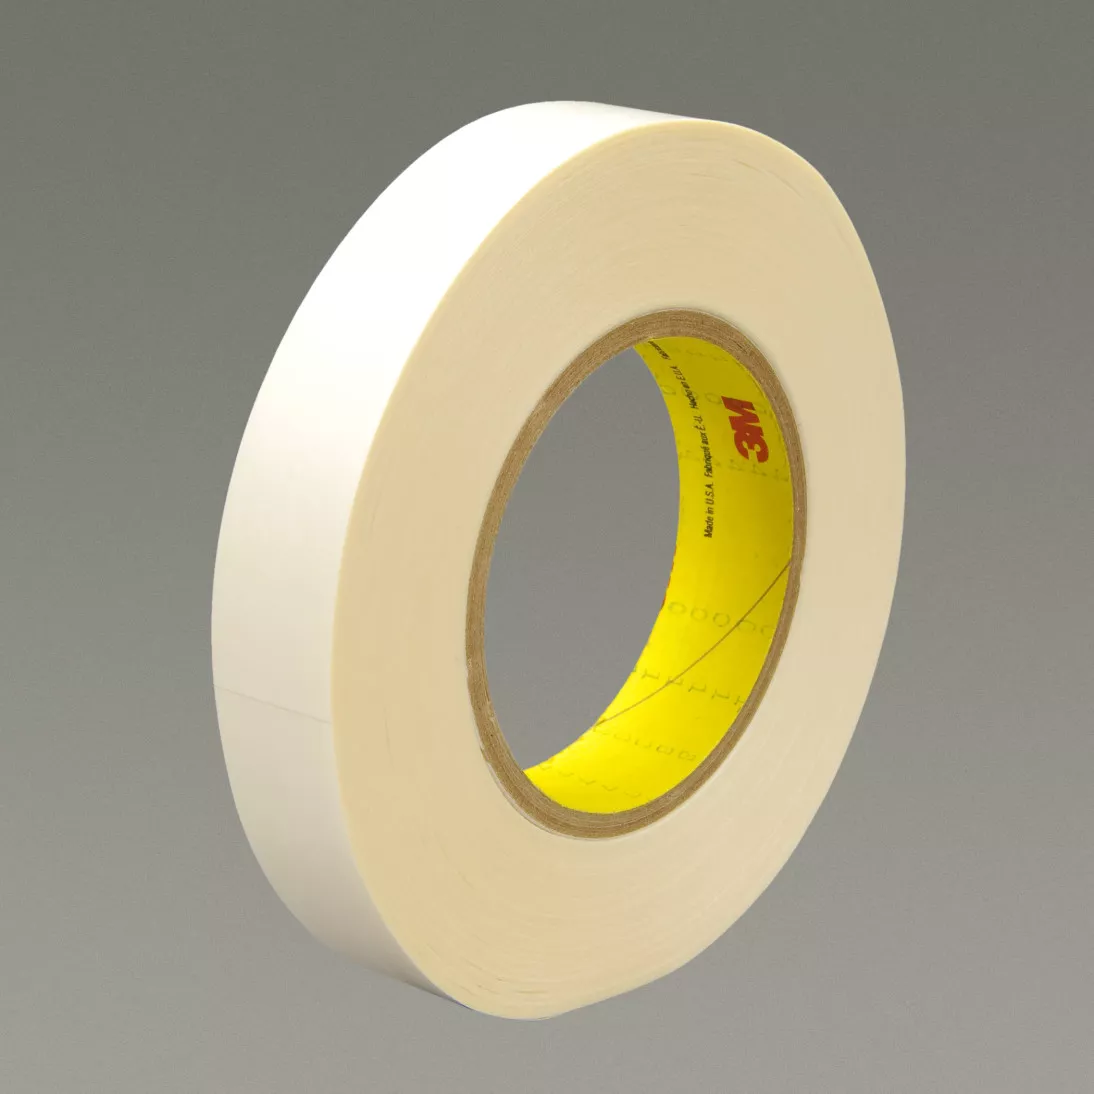 3M™ Repulpable Heavy Duty Double Coated Tape R3257, White, 24 mm x 55 m,
4.1 mil, 36 rolls per case